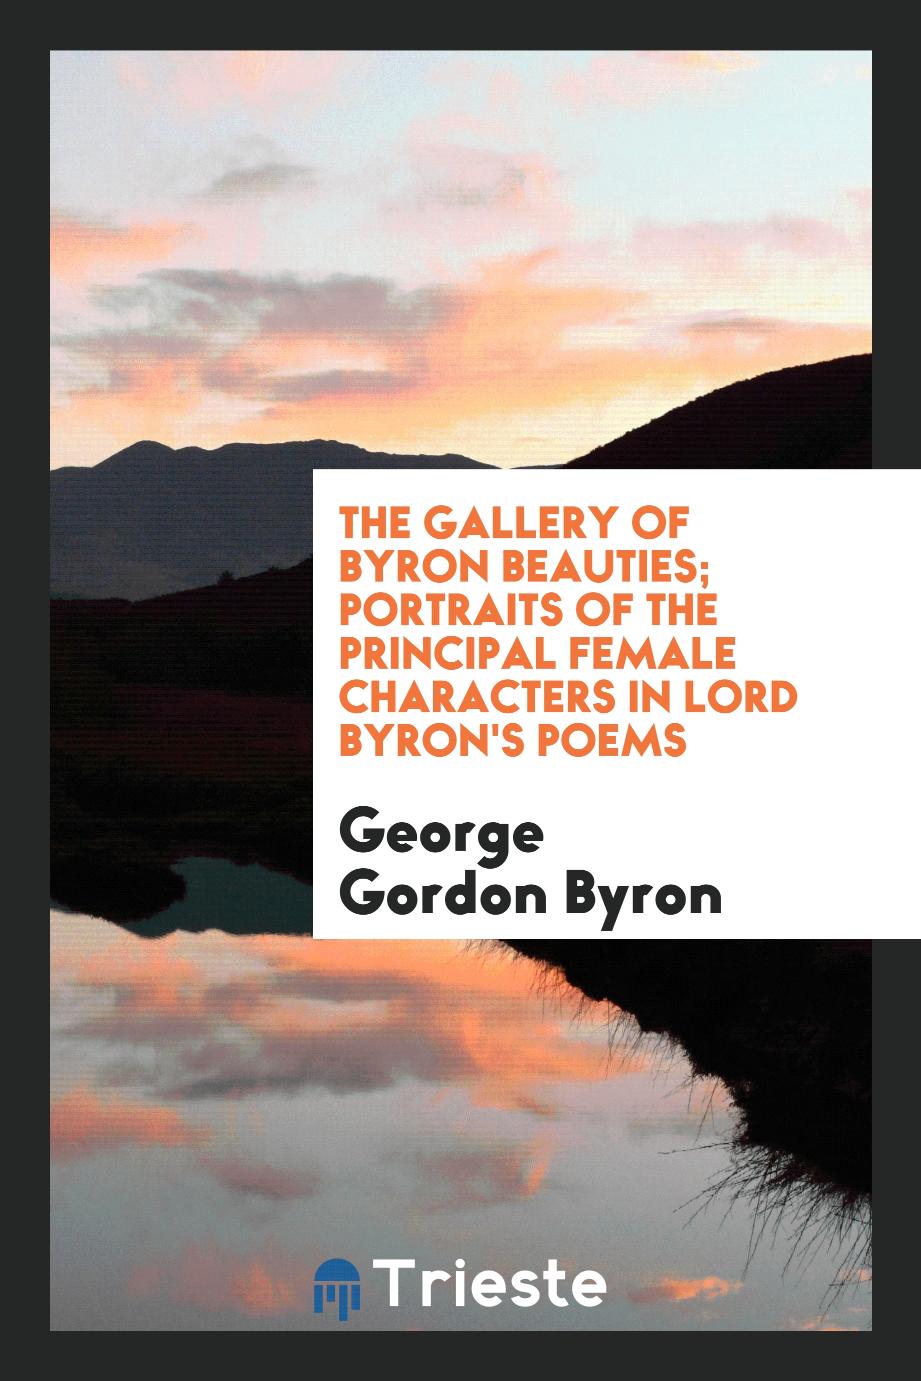 The gallery of Byron beauties; portraits of the principal female characters in Lord Byron's poems